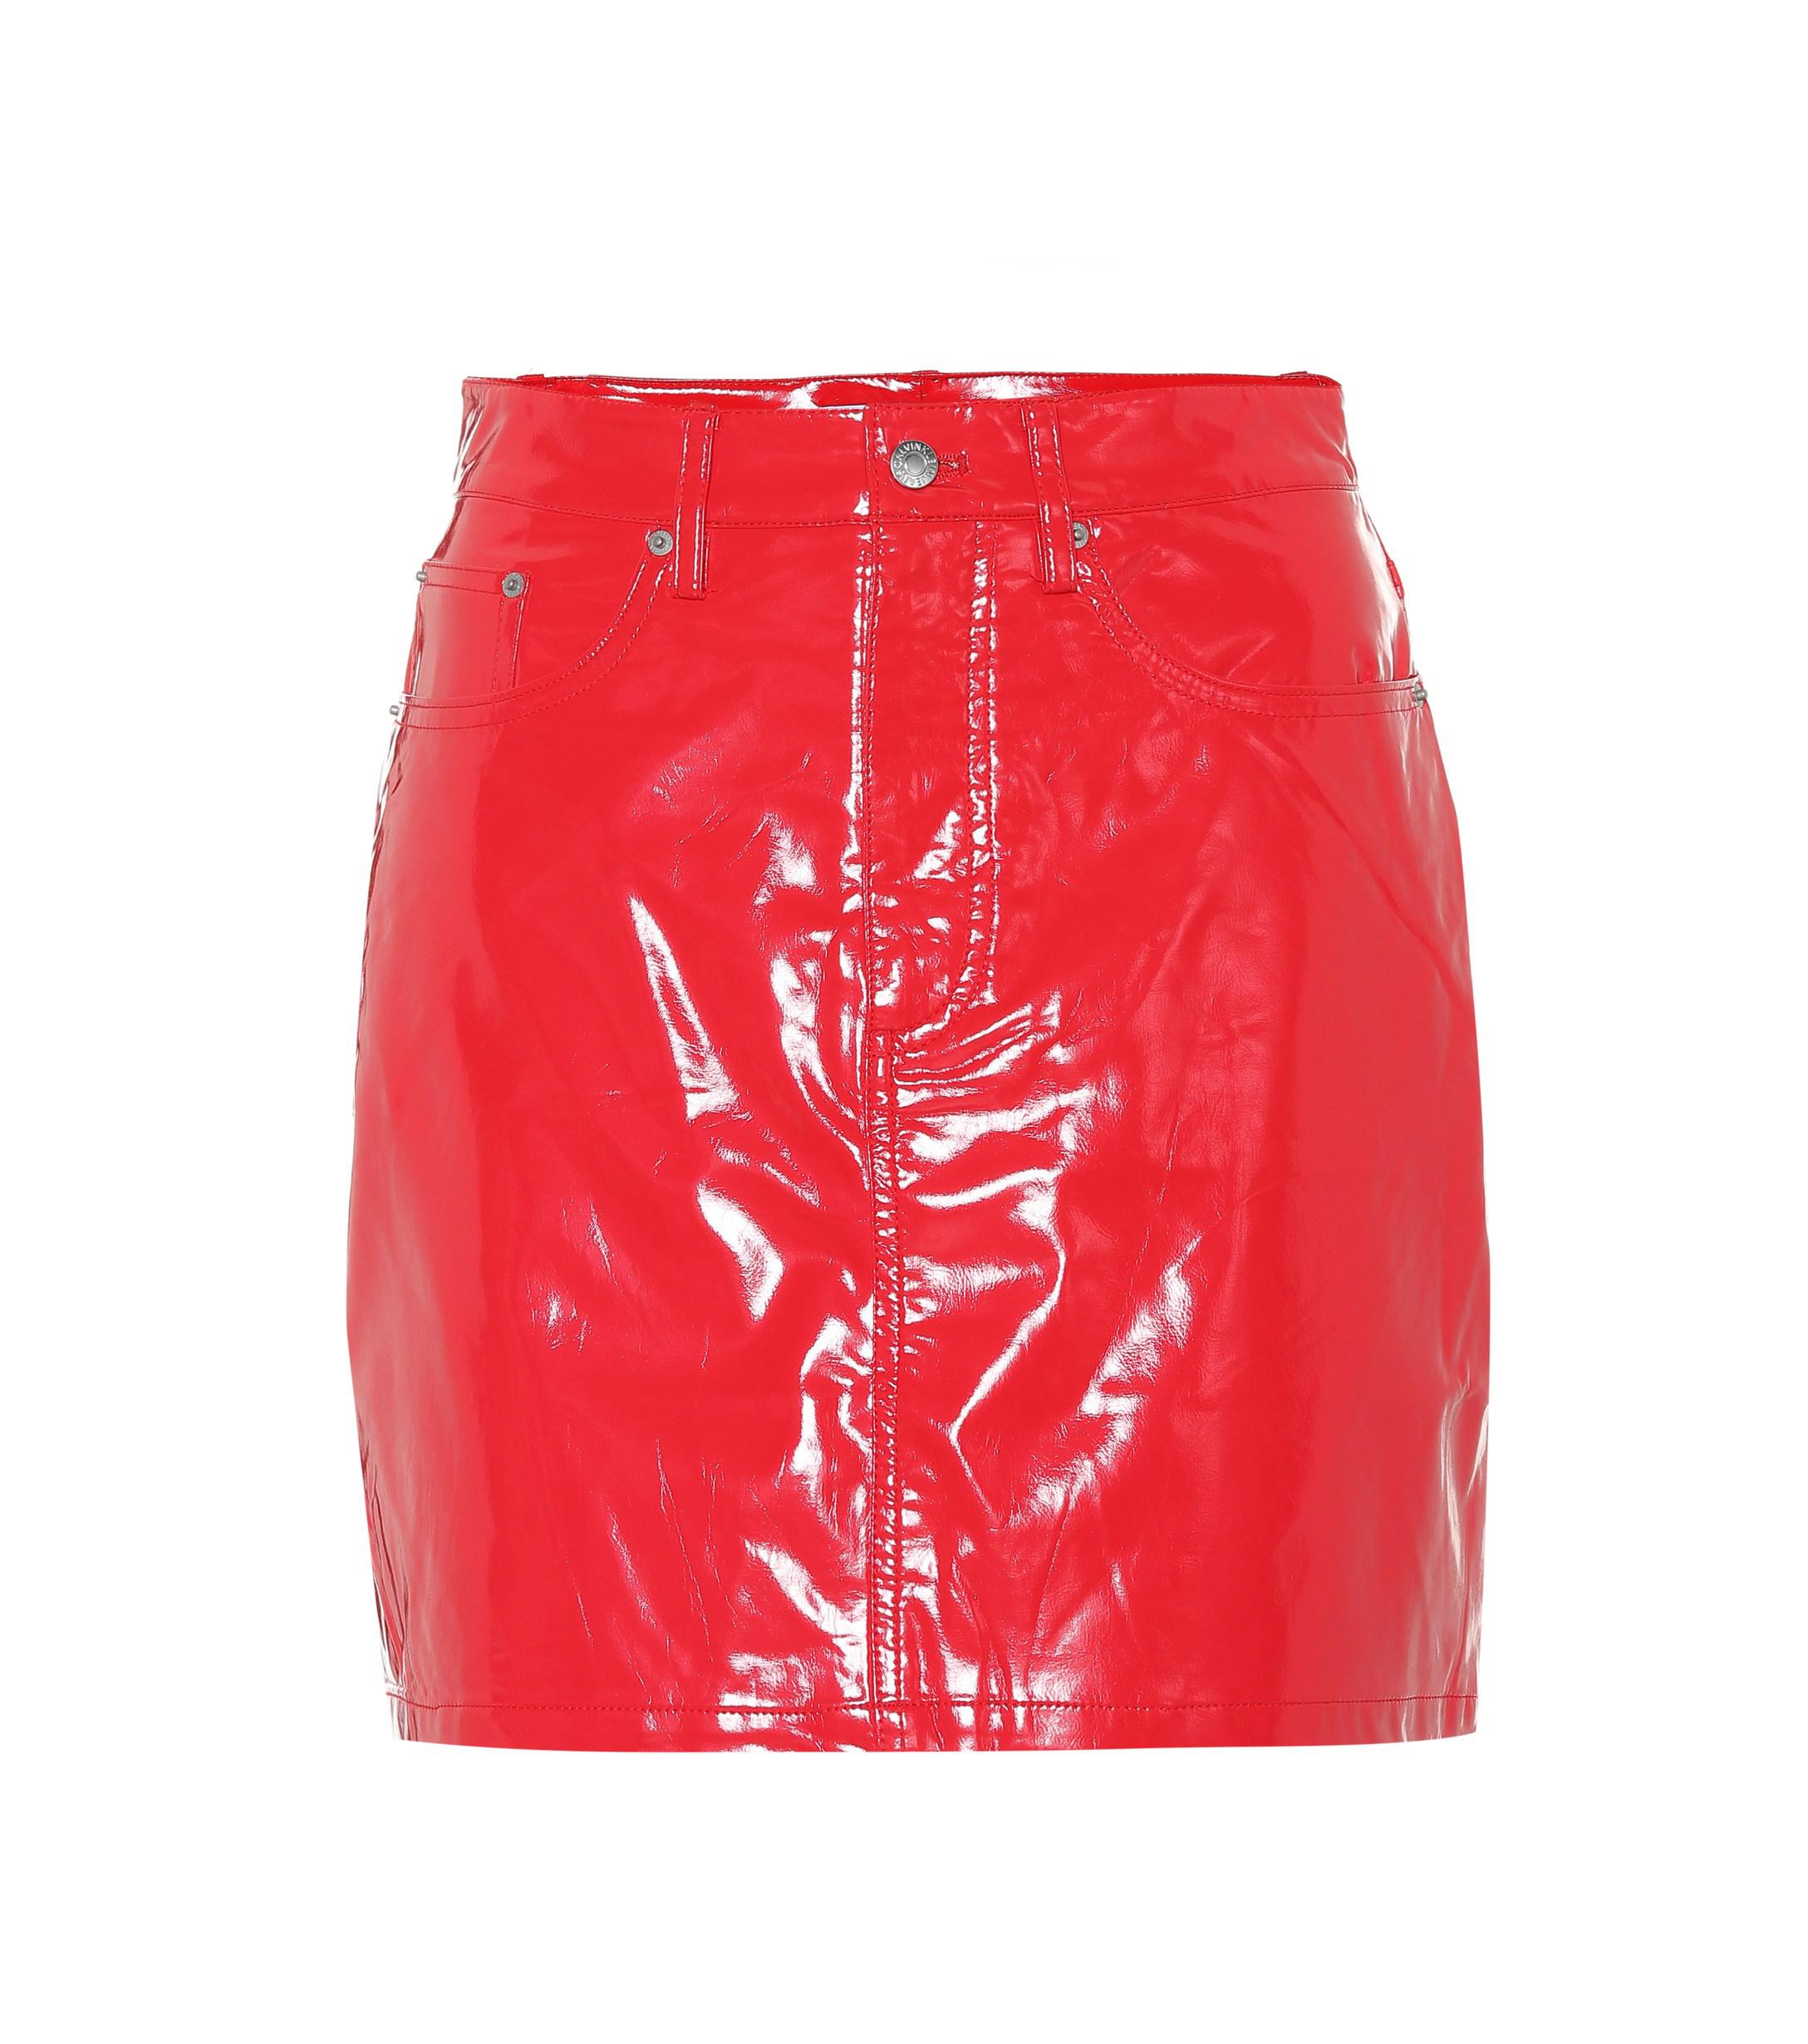 Lyst - Calvin Klein Faux Patent Leather Miniskirt in Red